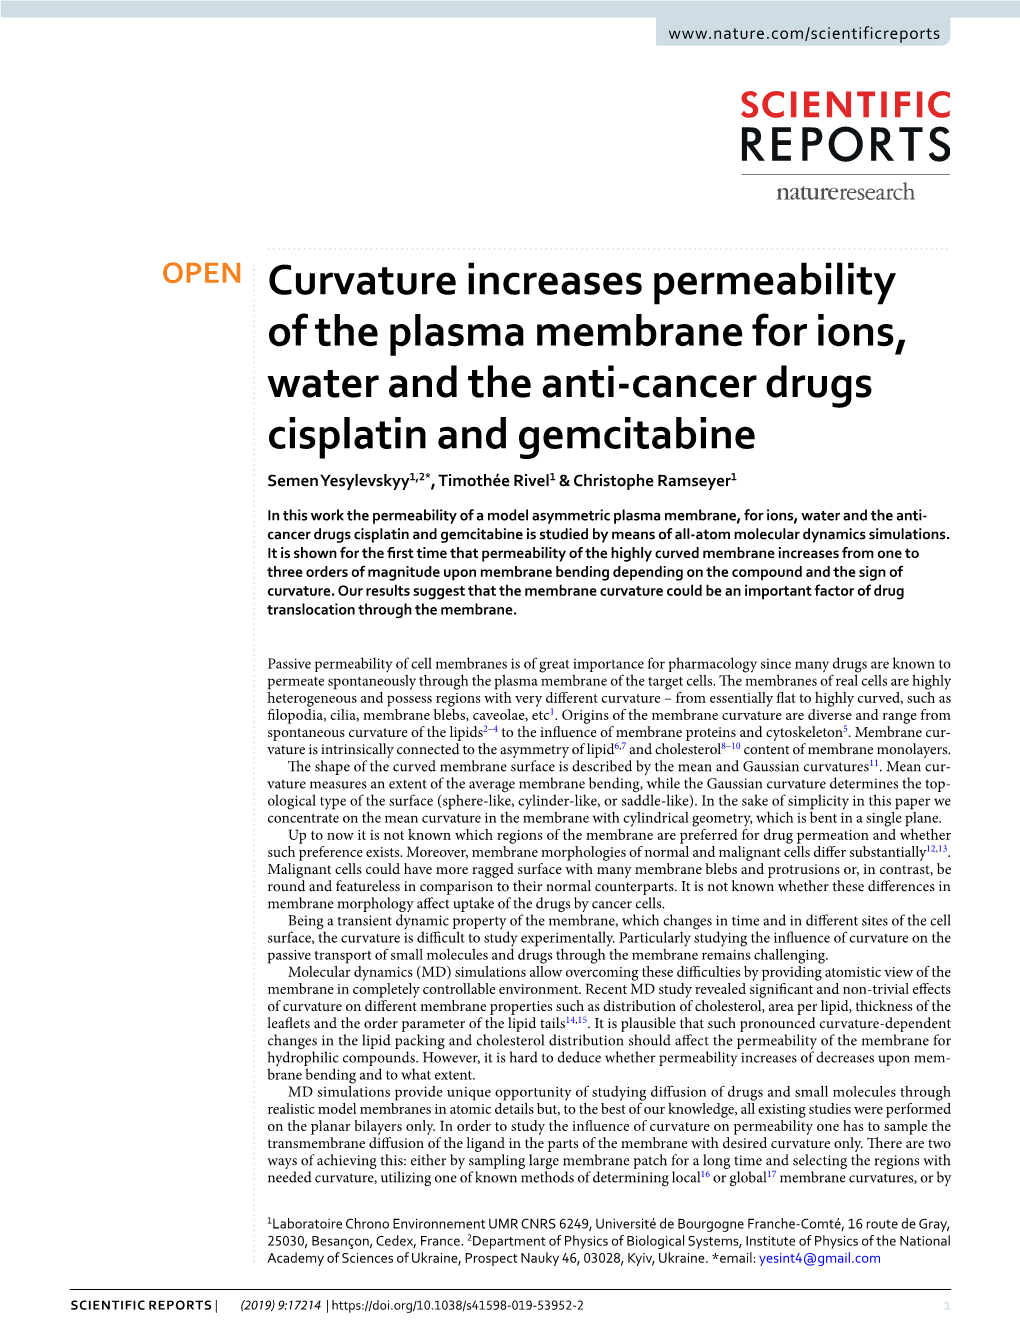 Curvature Increases Permeability of the Plasma Membrane For